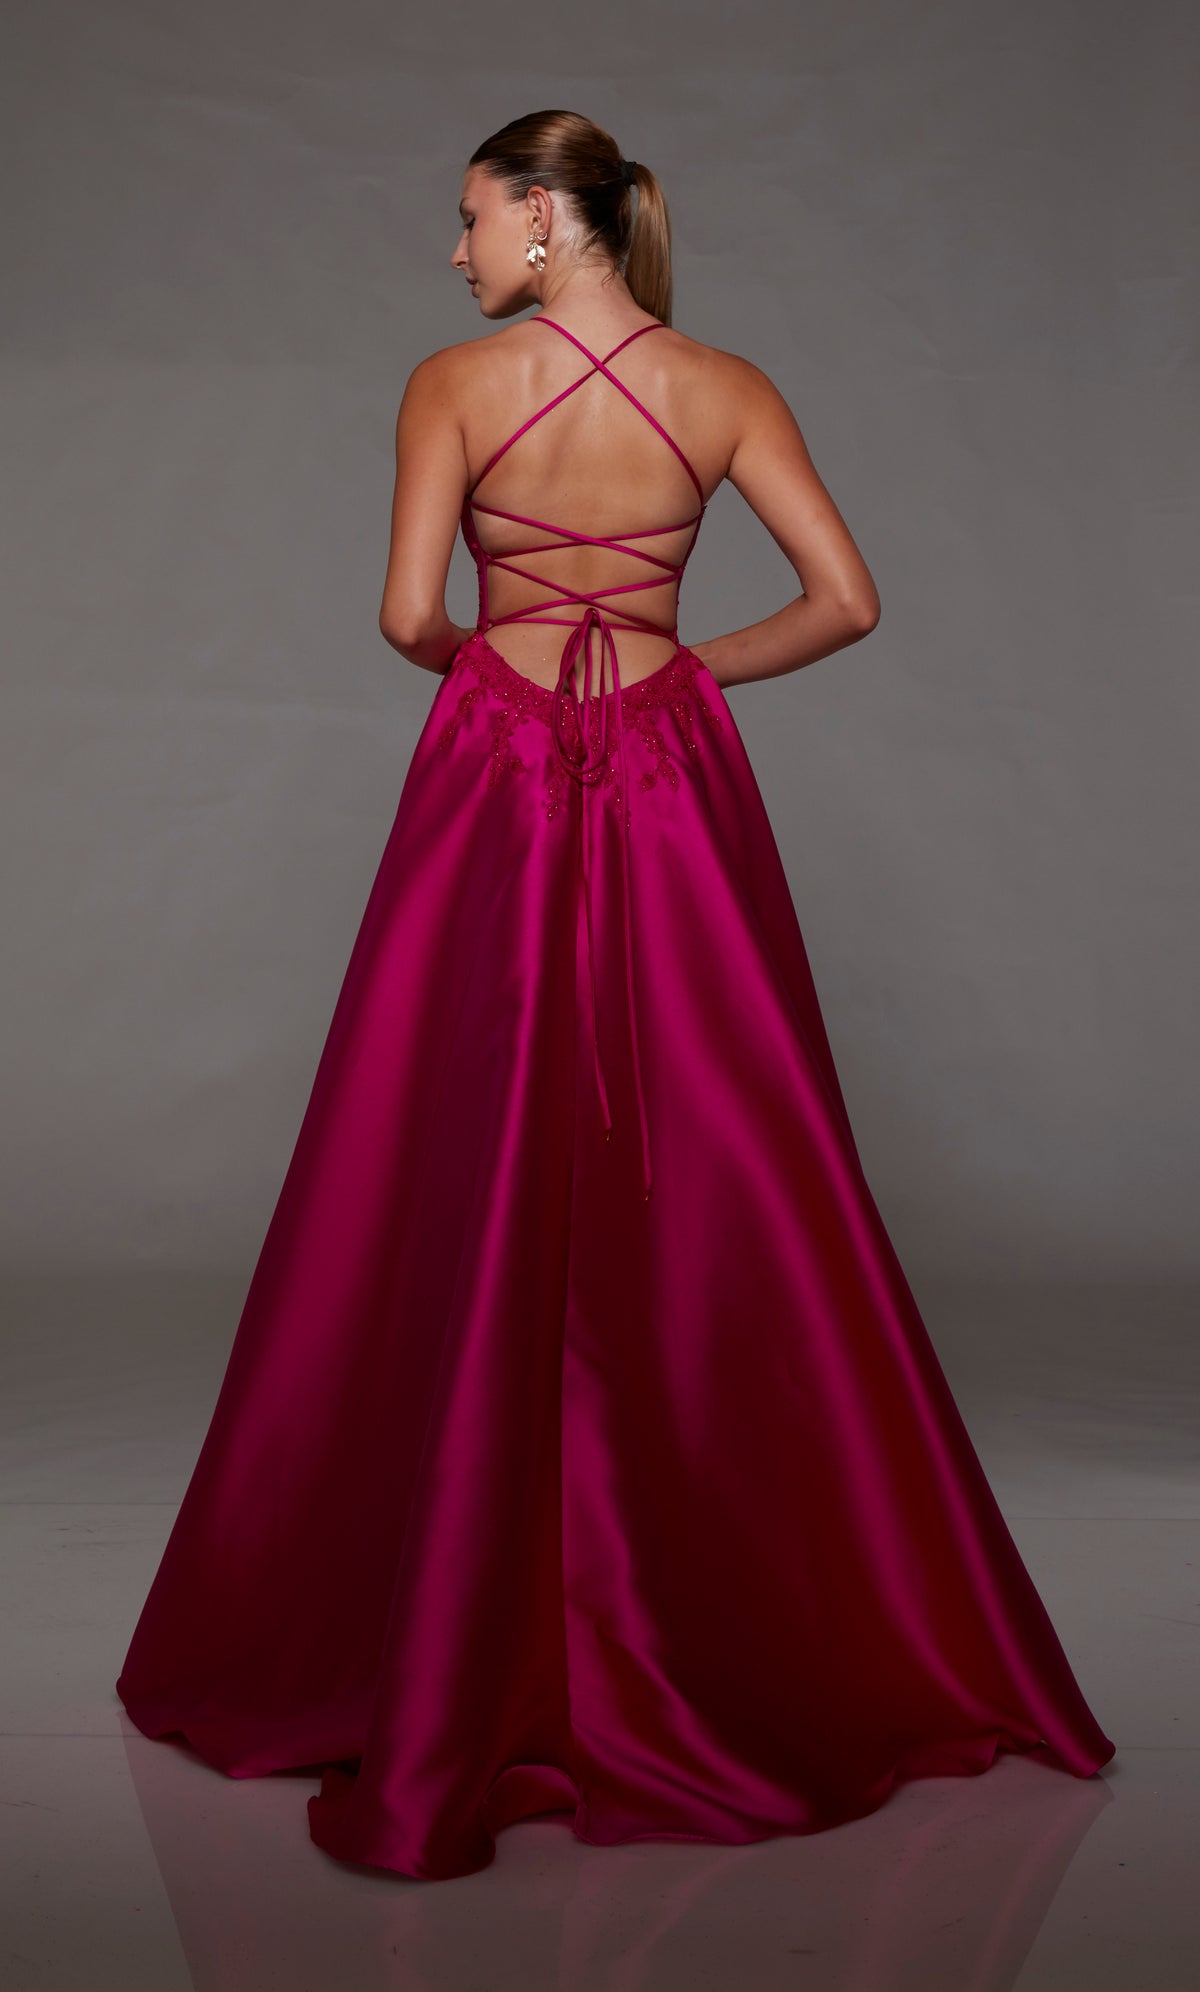 Pink mikado ball gown with lace corset, strappy back, and slight train for an stylish and vibrant look.